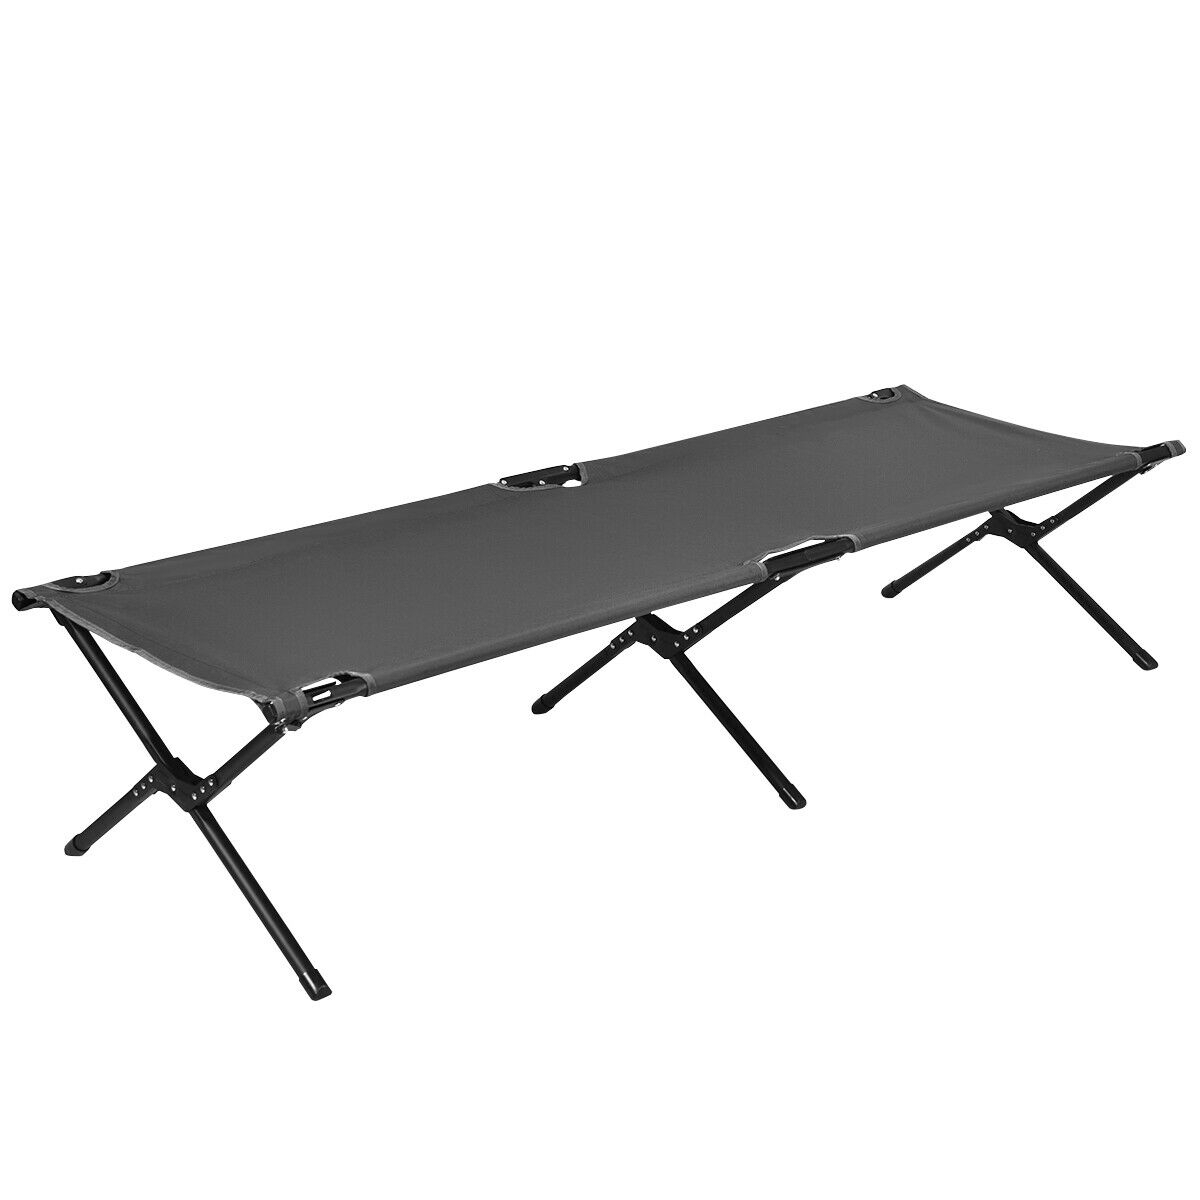 Folding Camping Cot & Bed Heavy-Duty For Adults Kids W/ Carrying Bag 300LBS Grey